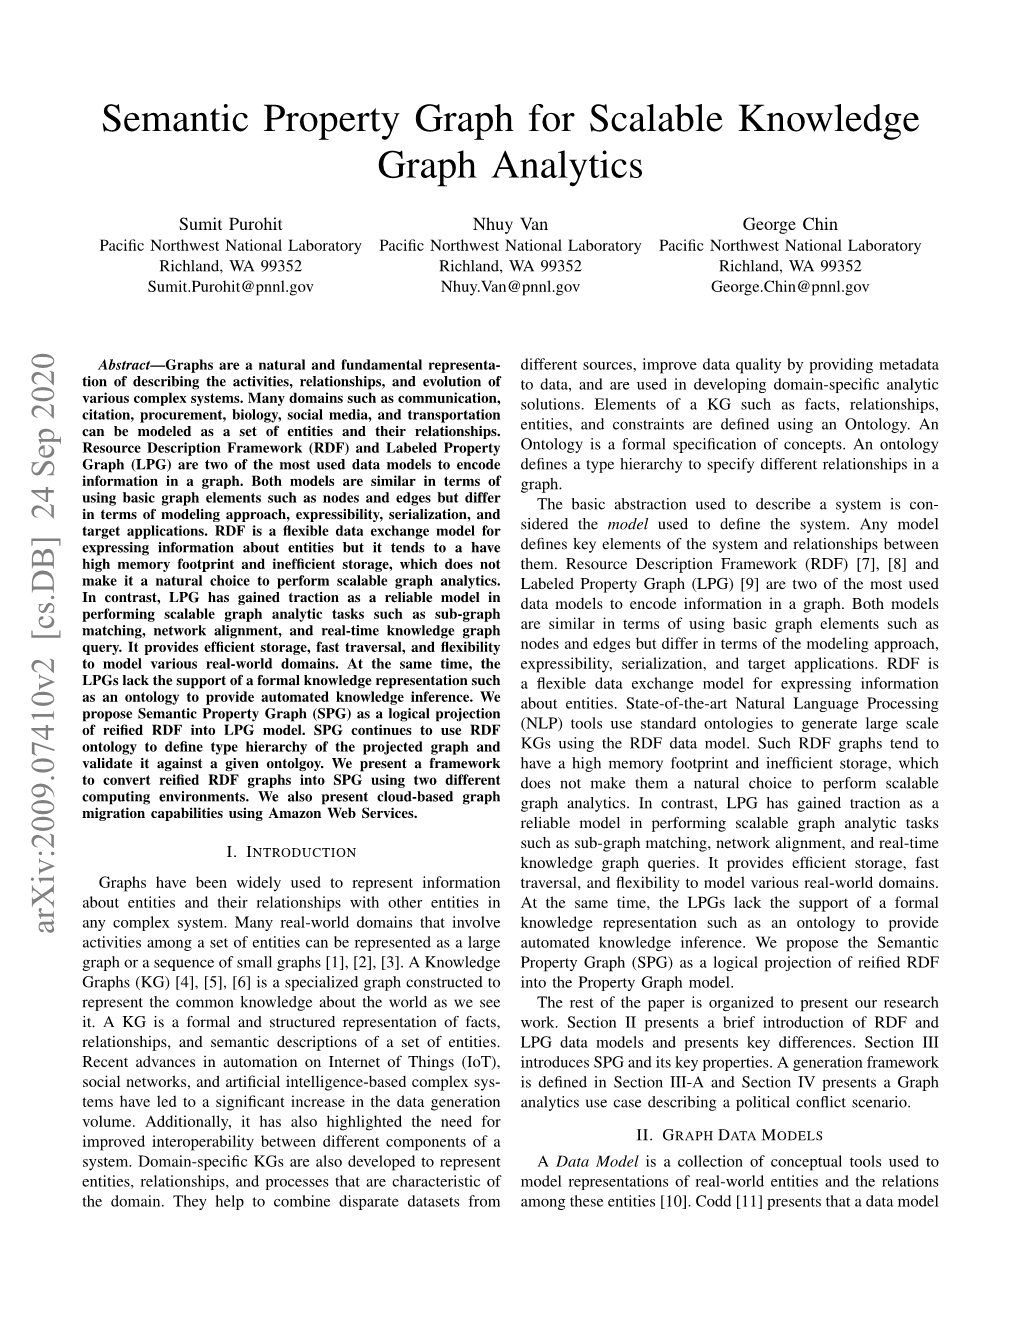 Semantic Property Graph for Scalable Knowledge Graph Analytics